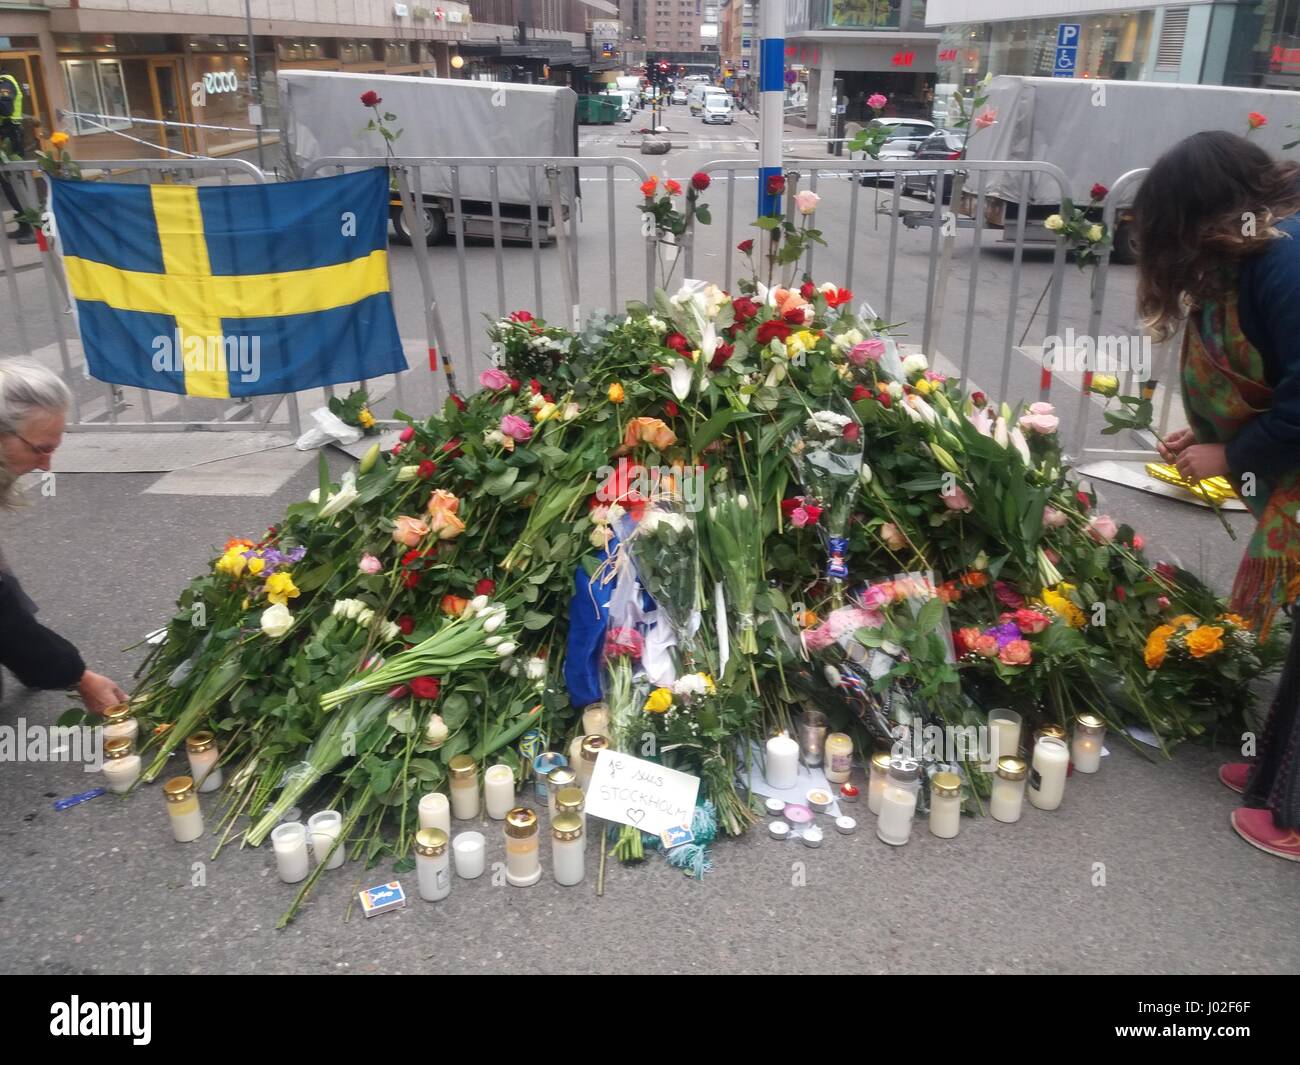 Piles of fresh flower bouquets, laid near the Ahlens shopping centre of Stockholm city(Drottninggatan str)  portraying the Swedish sympathy and sorrow for the lost lives of their compatriots, after a terrorist attacker driving a truck at high speed, slammed into pedestrians walking around the cityat  the time of the attack. Stock Photo